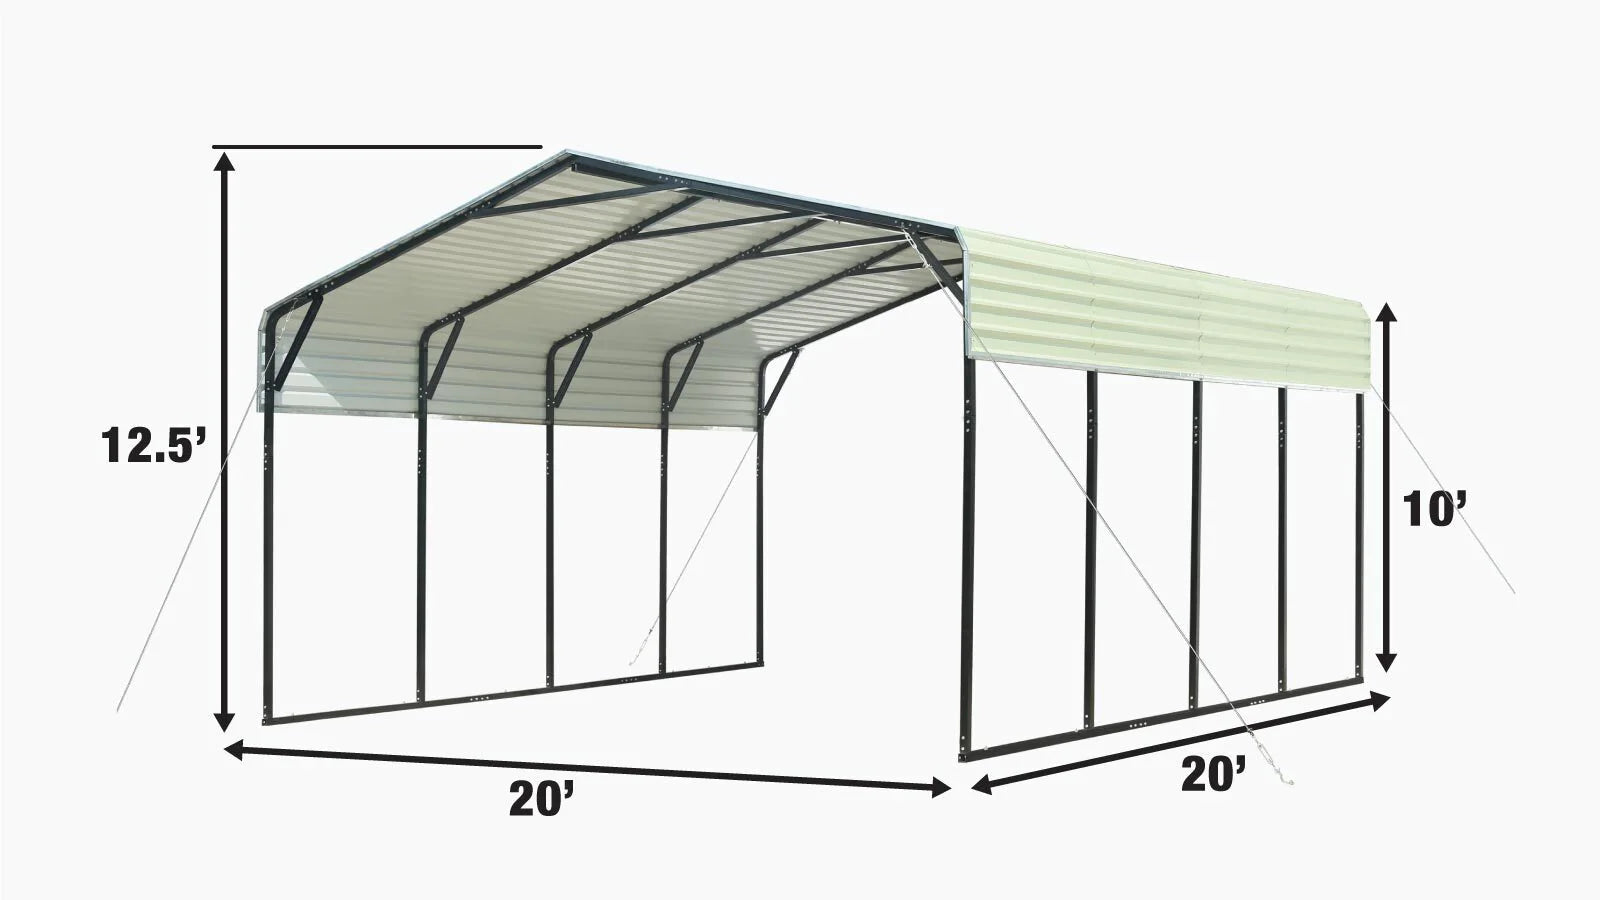 TMG Industrial 20’ x 20’ All-Steel Carport w/10’ Open Sidewalls, Galvanized Roof, Powder Coated, Polyester Paint Coating, Stabilizing Cables, TMG-CP2020 (Not available for online purchase)-specifications-image